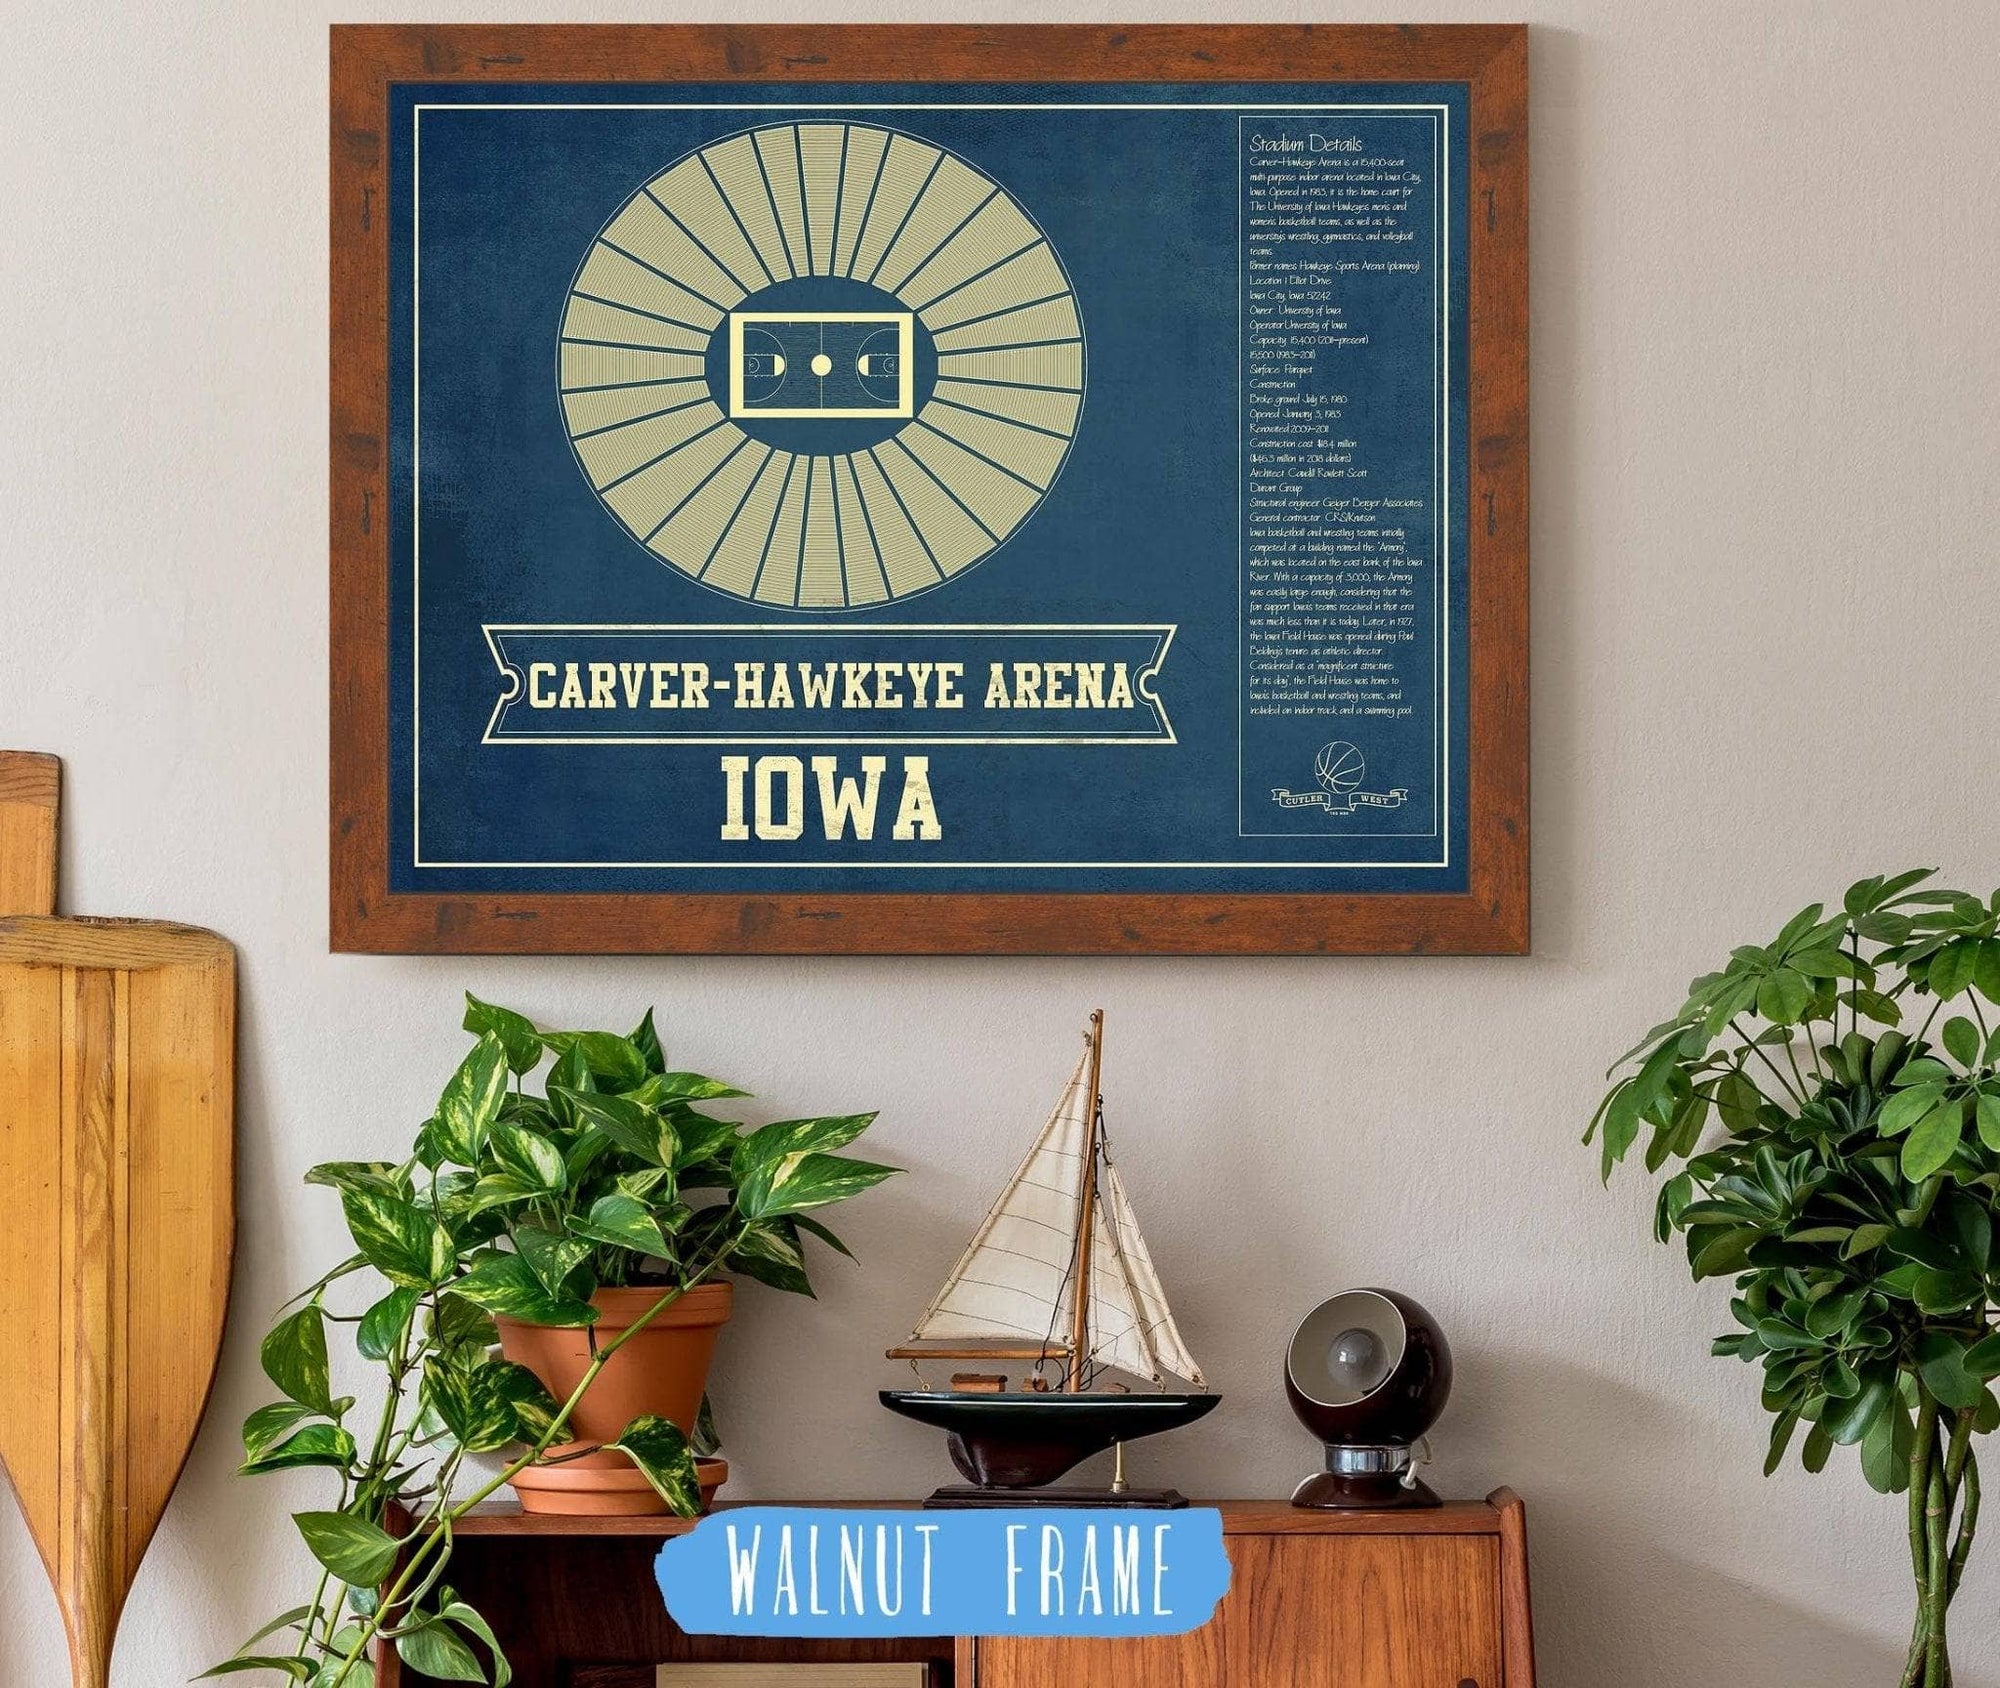 Cutler West Basketball Collection 14" x 11" / Walnut Frame Carver–Hawkeye Arena Iowa Men's And Women's Basketball Vintage Print 933350233_83429